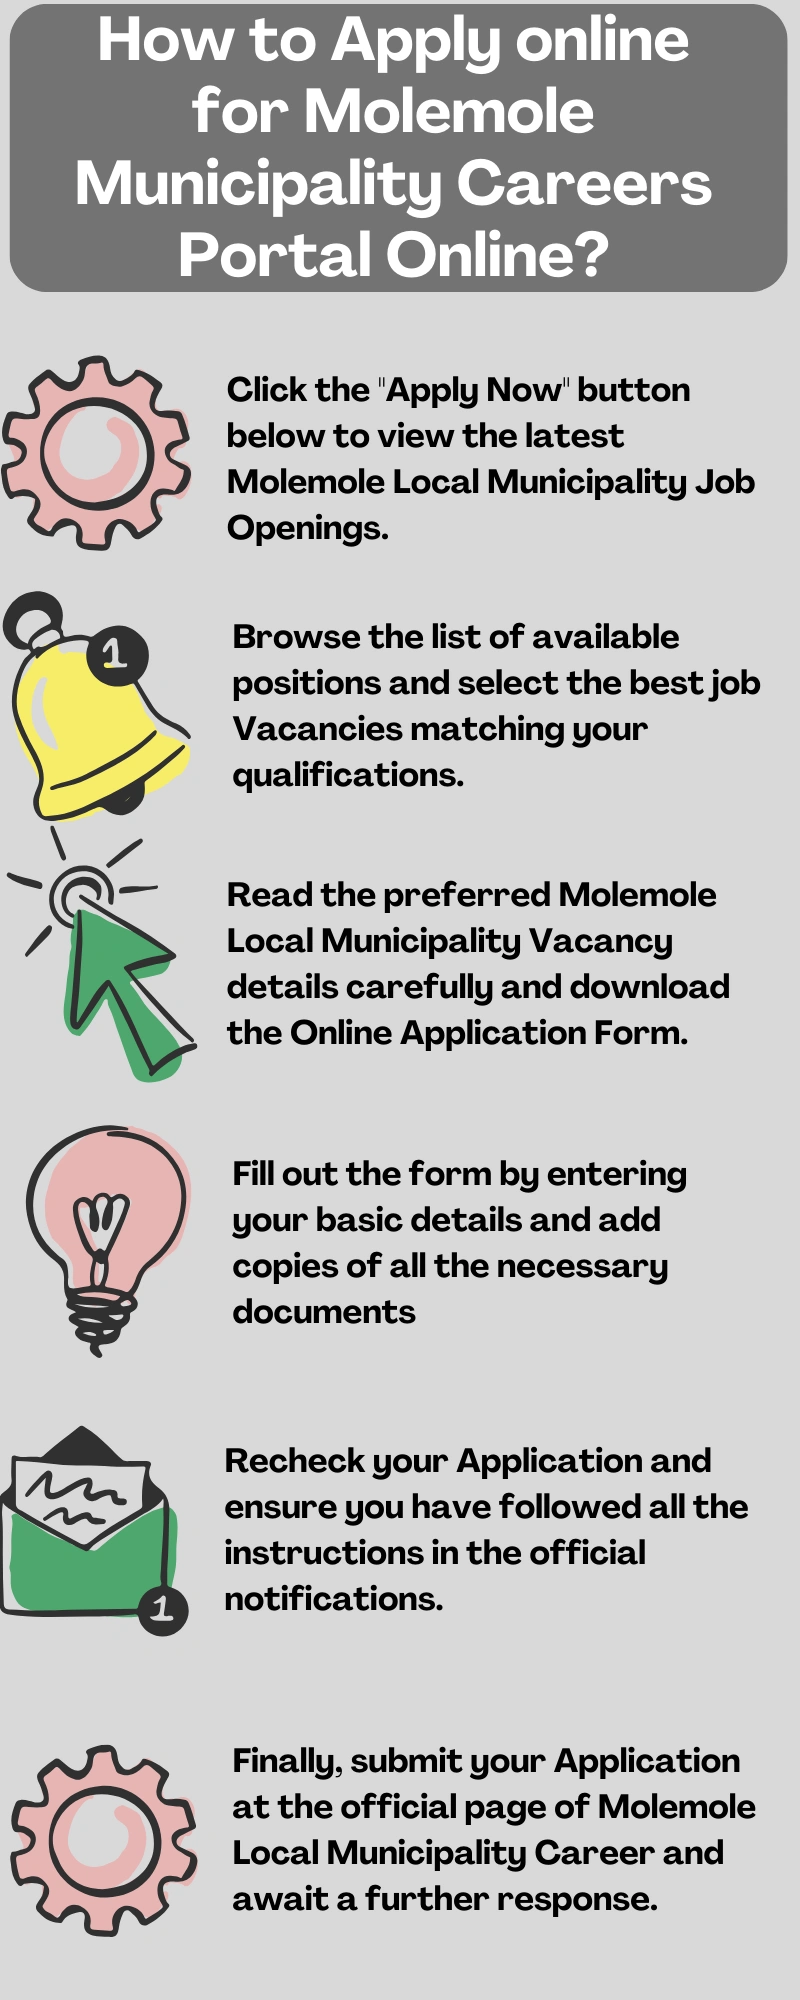 How to Apply online for Molemole Municipality Careers Portal Online?